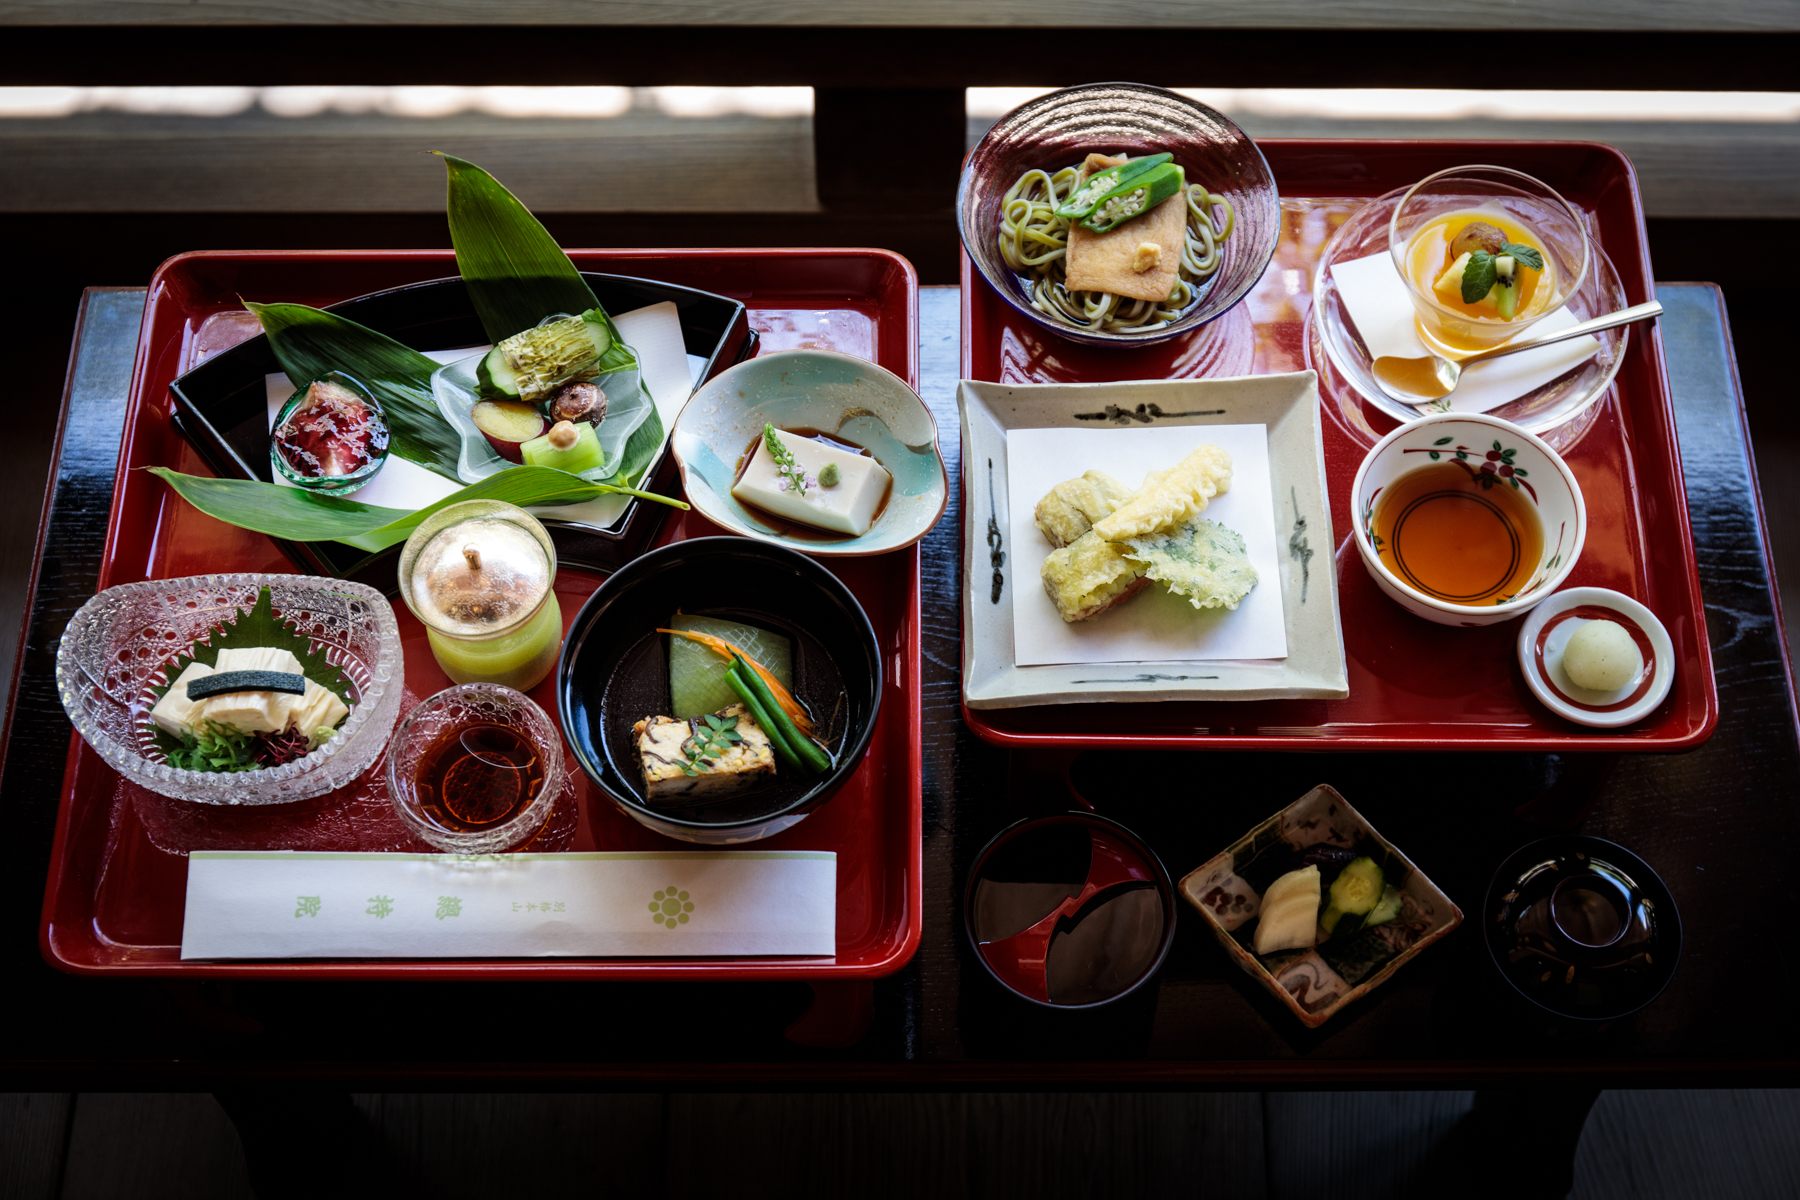 An example of traditional shojin ryori—traditional Buddhist cuisine comprised of nutritious and richly flavorful dishes.